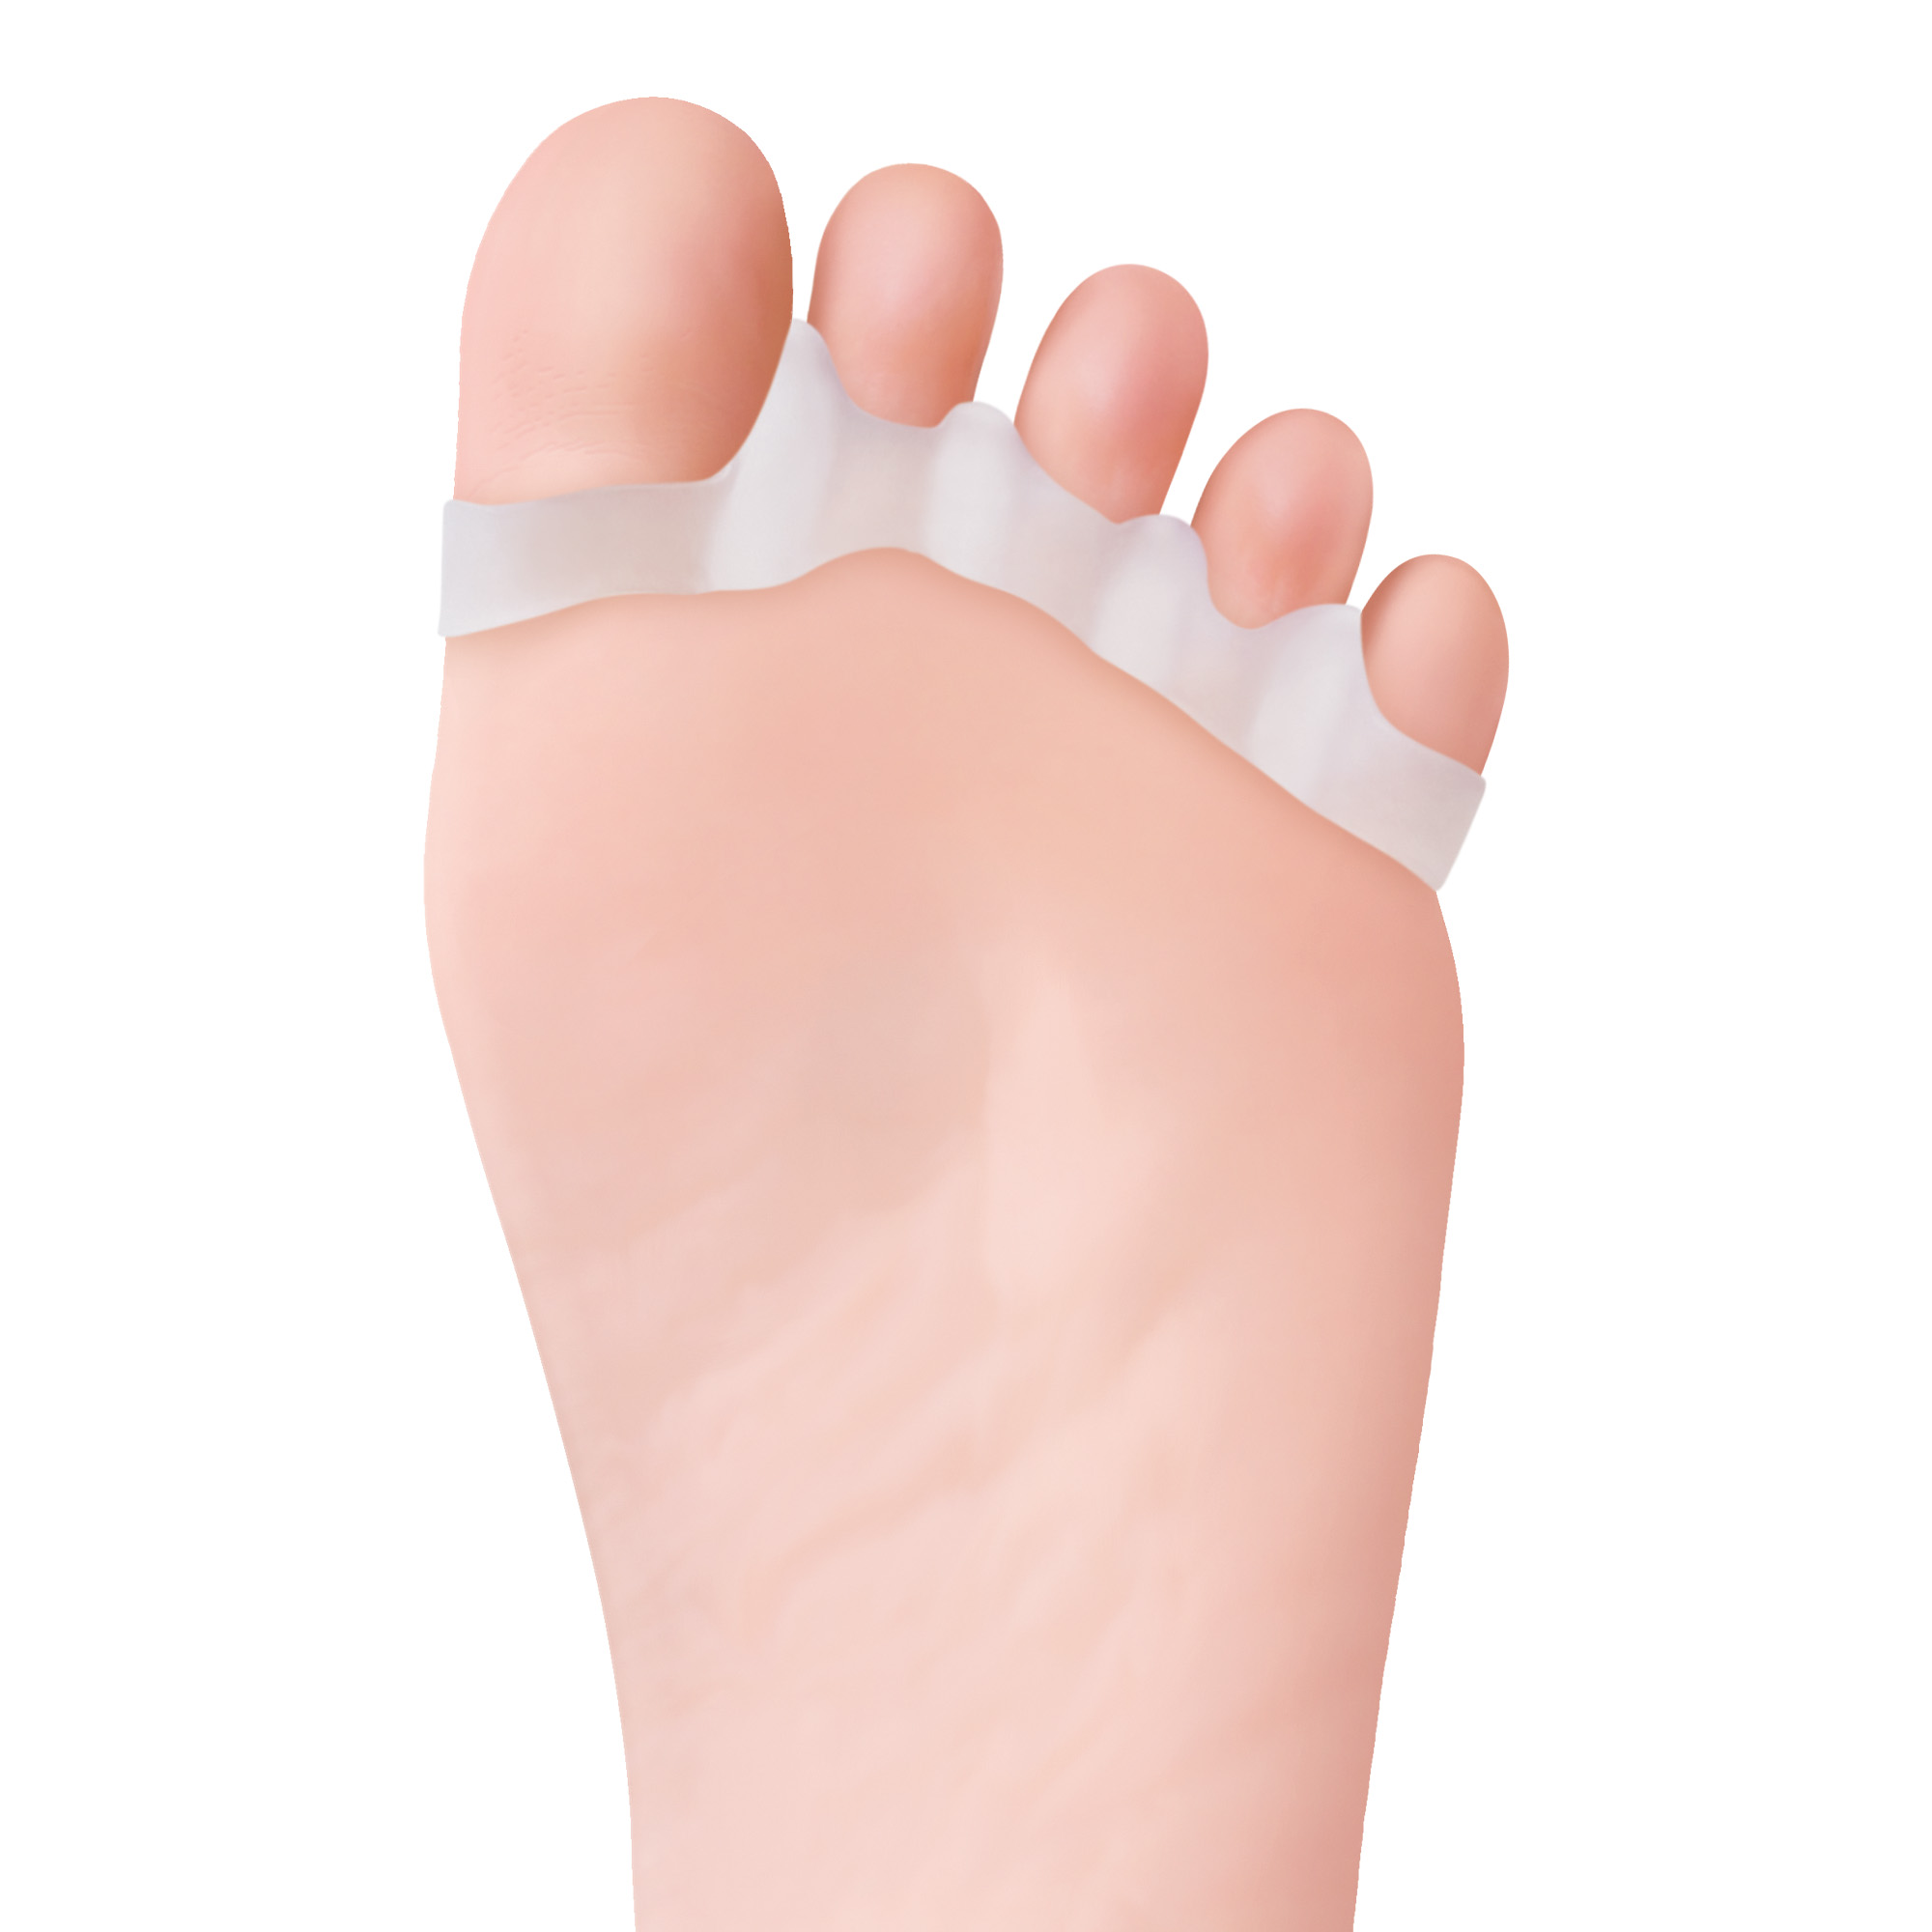 Gel toe spreader for all toes 2 pcs